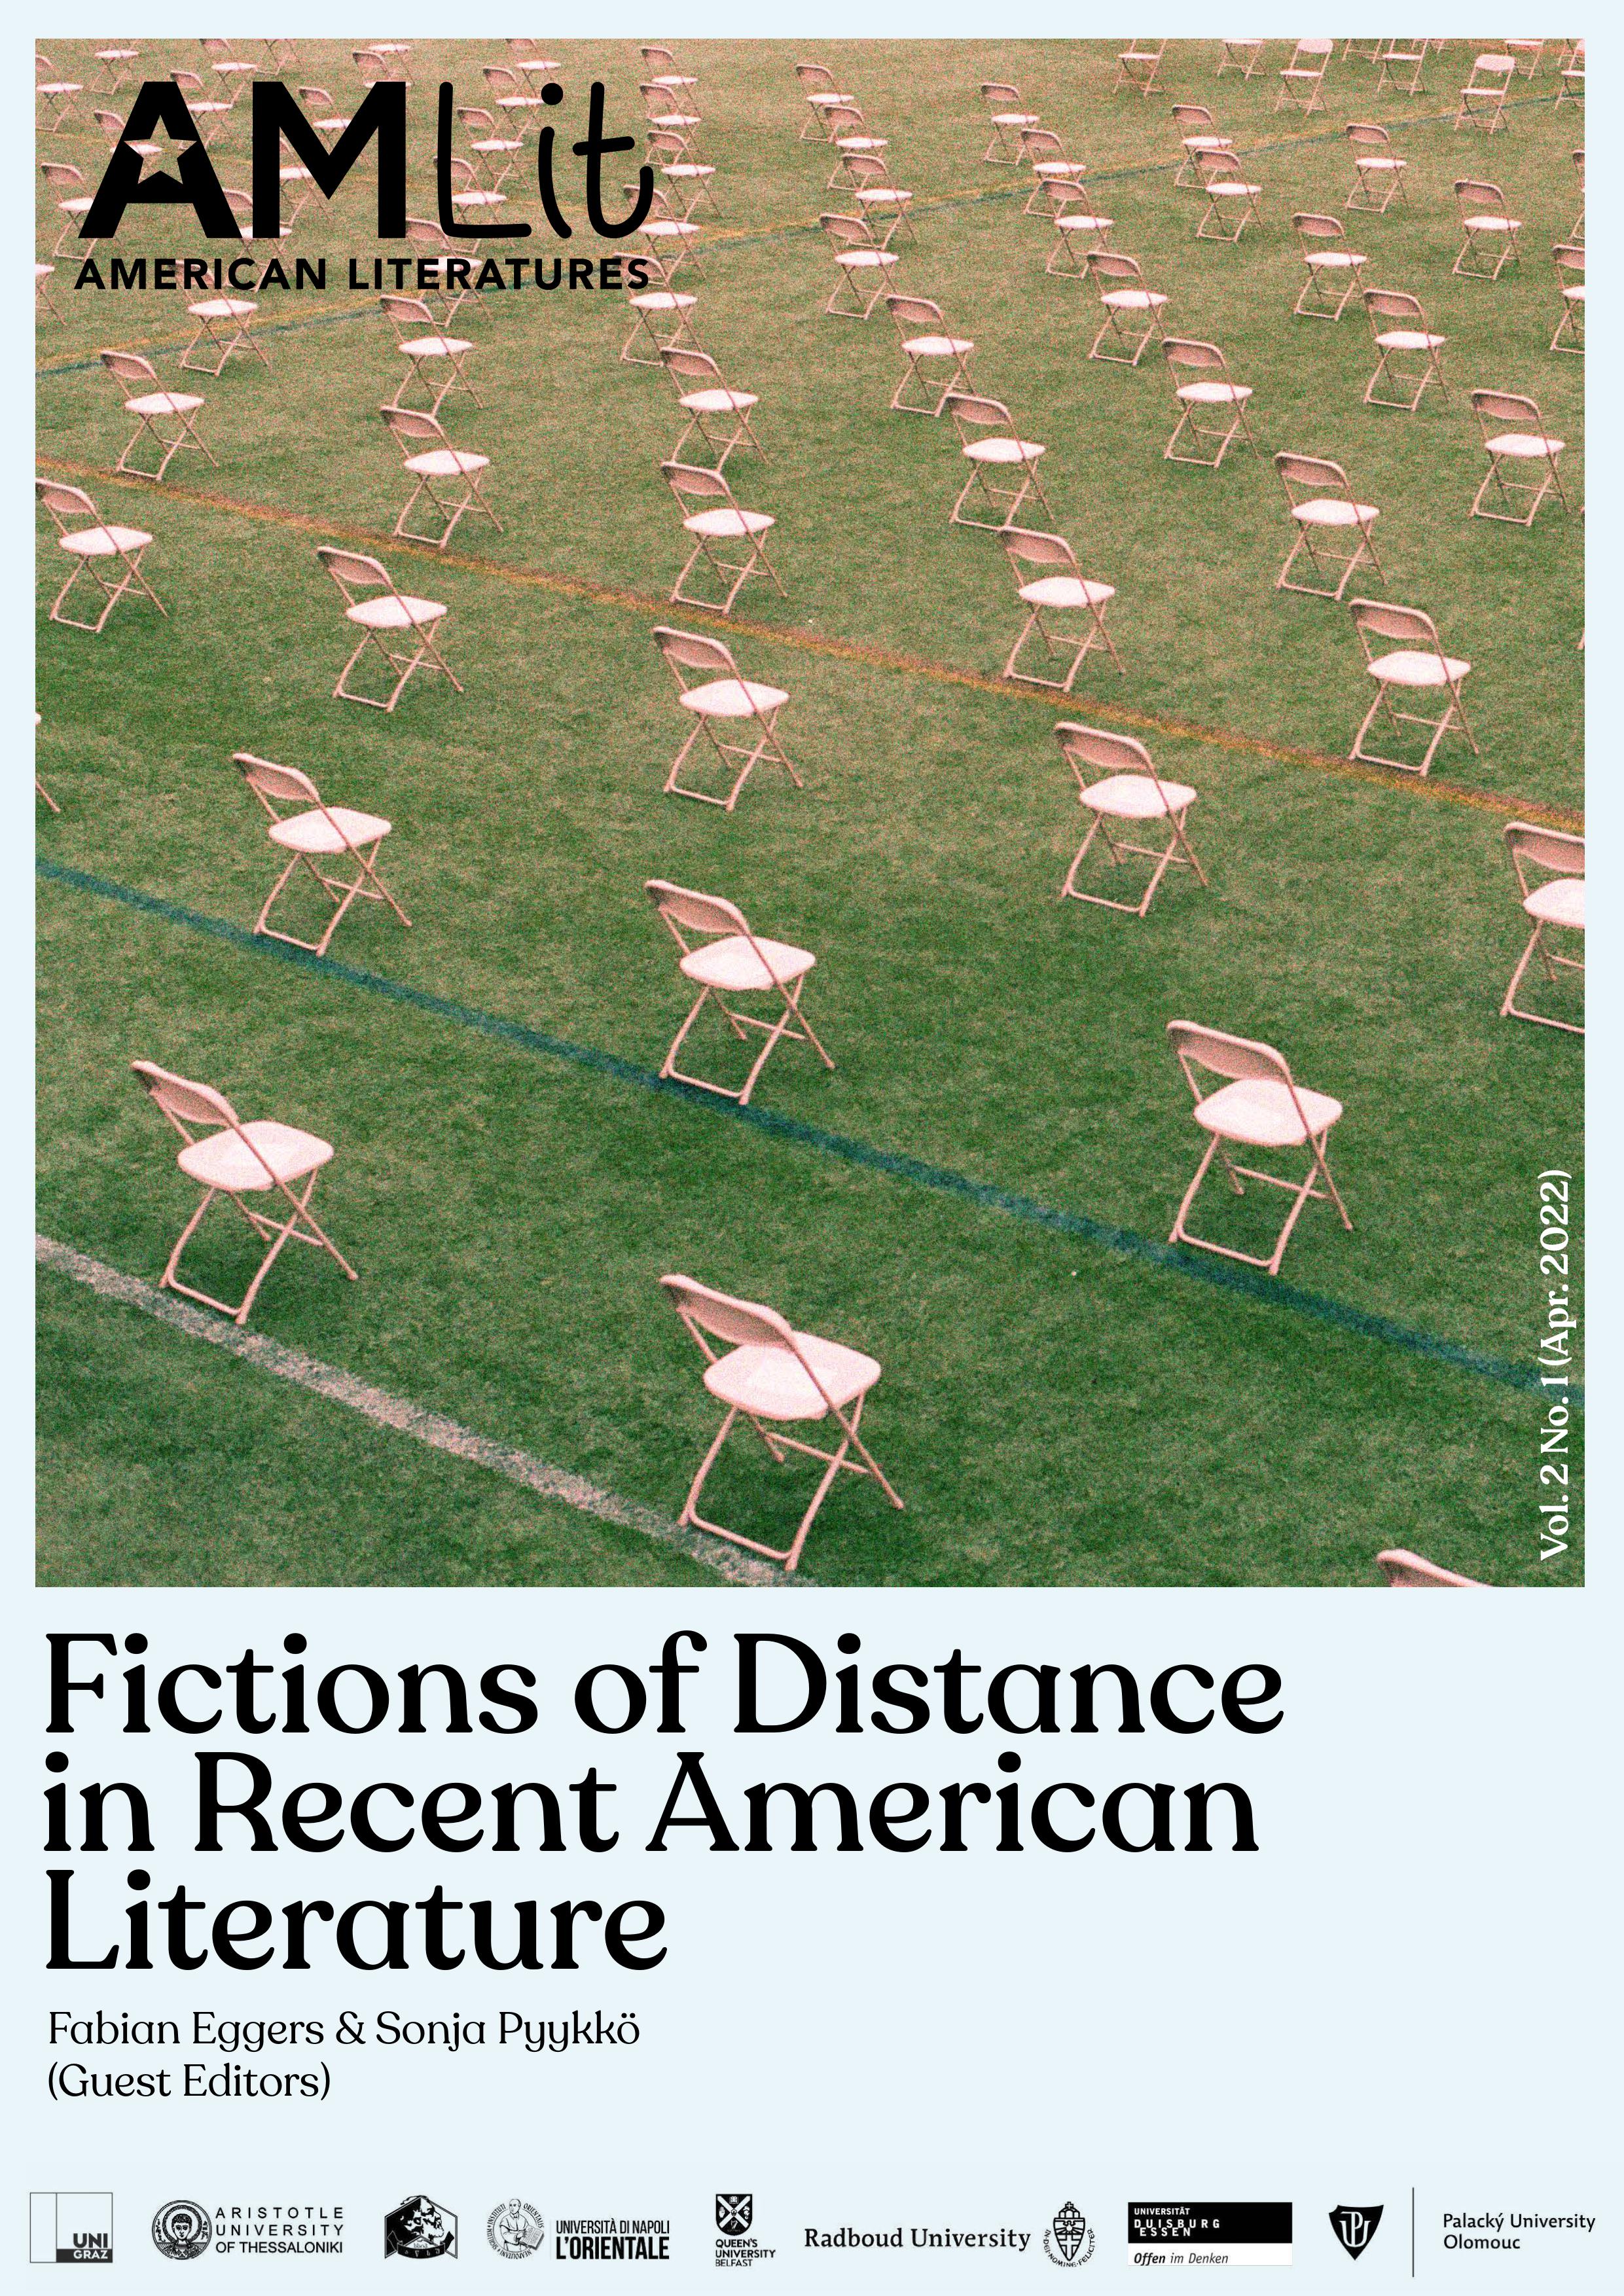 Sleep as Action? World Alienation, Distance, and Loneliness in